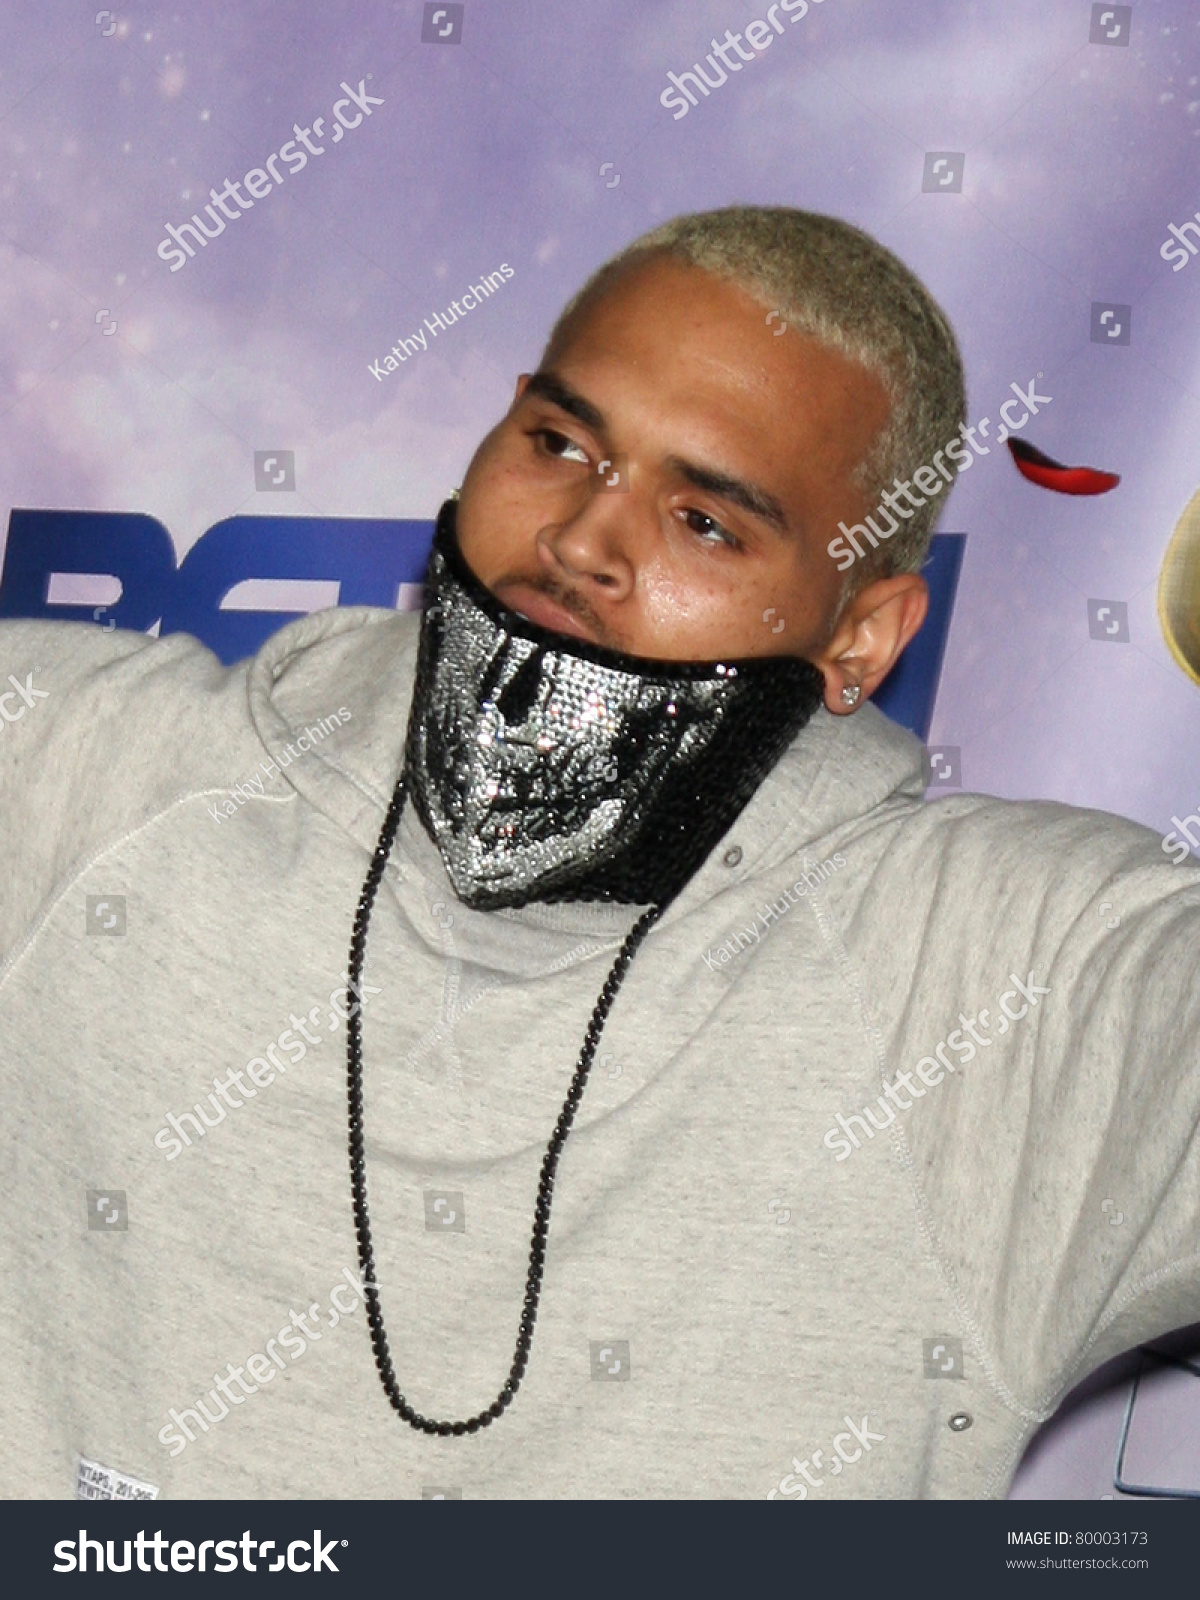 chris brown booking agent